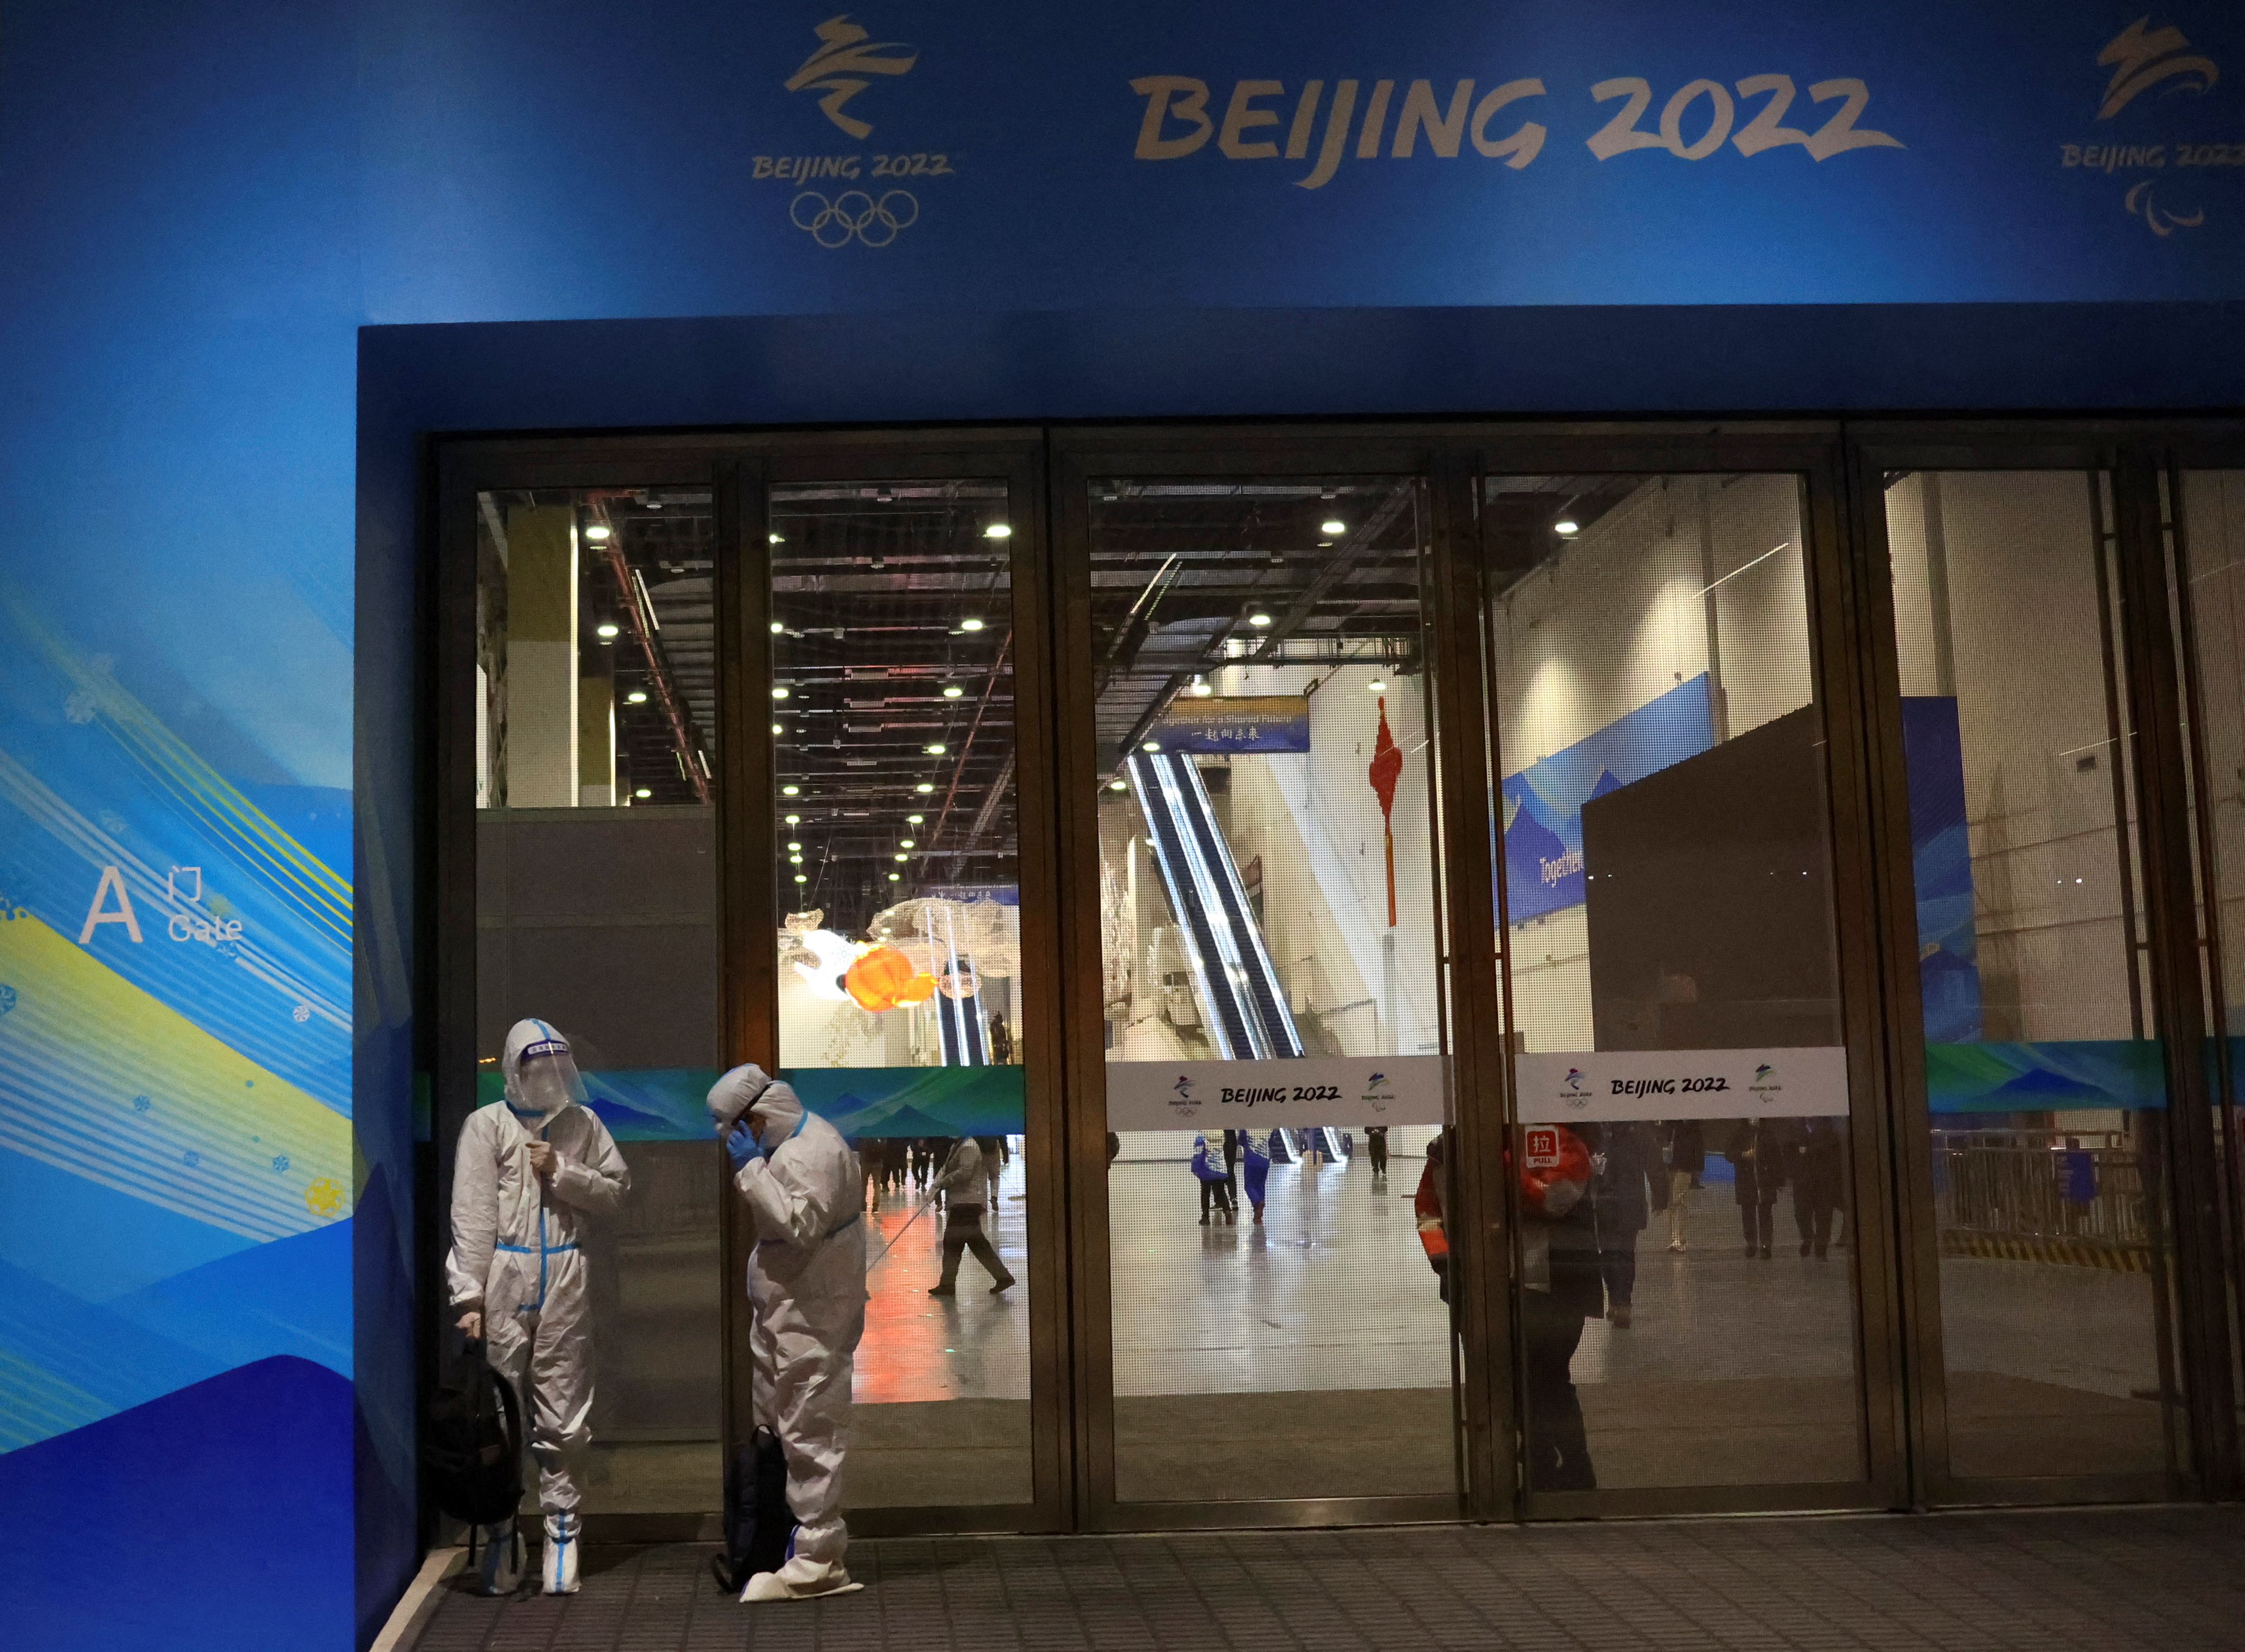 Workers wear  protective suits to protect from coronavirus disease (COVID-19) as they stand outside the Main Press Centre of the Beijing 2022 Winter Olympics ahead of the event in Beijing, China January 19, 2022.    REUTERS/Fabrizio Bensch